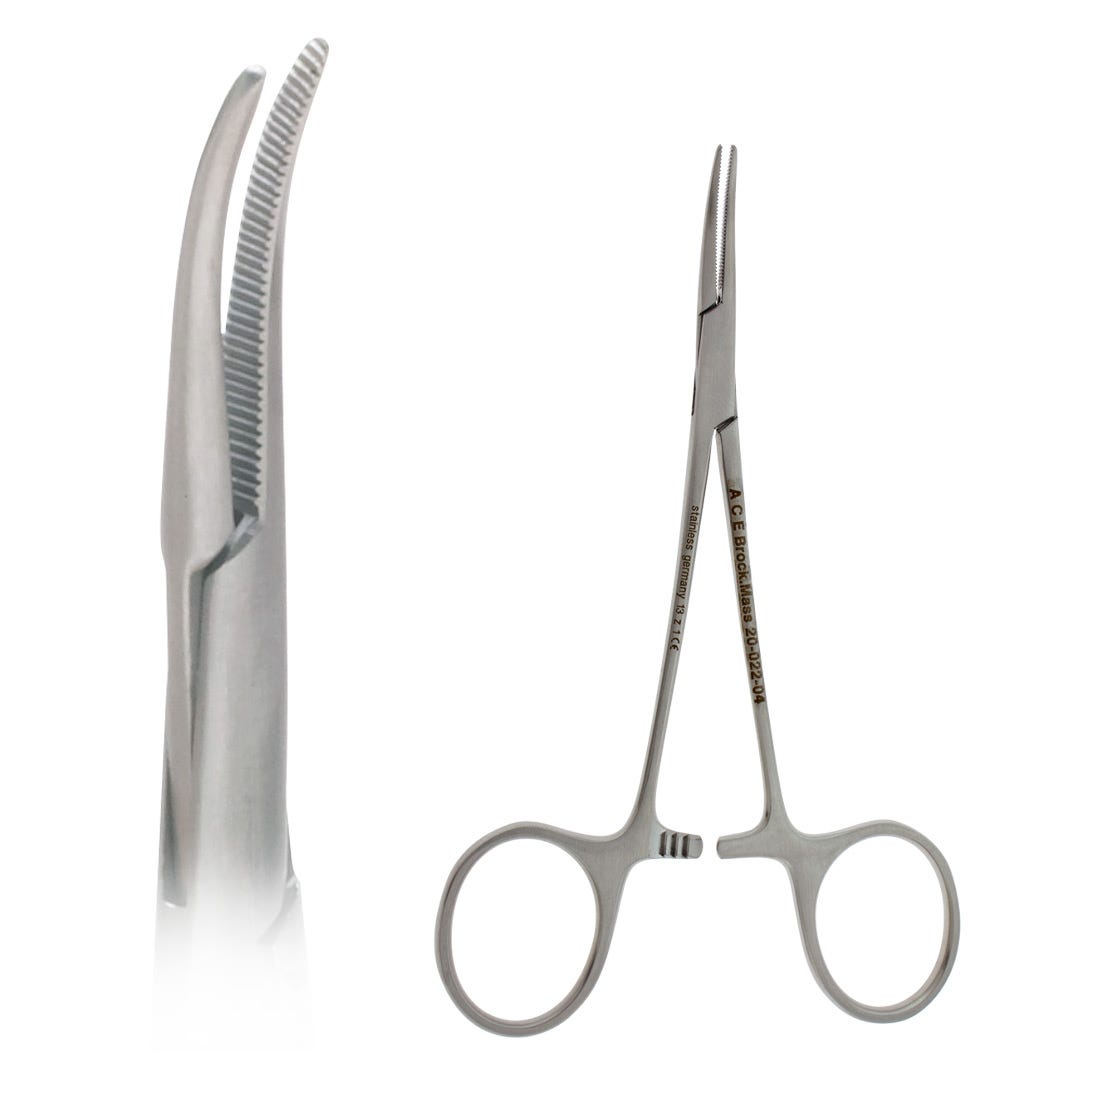 ACE Halsted Mosquito Forceps, curved, extra light tips